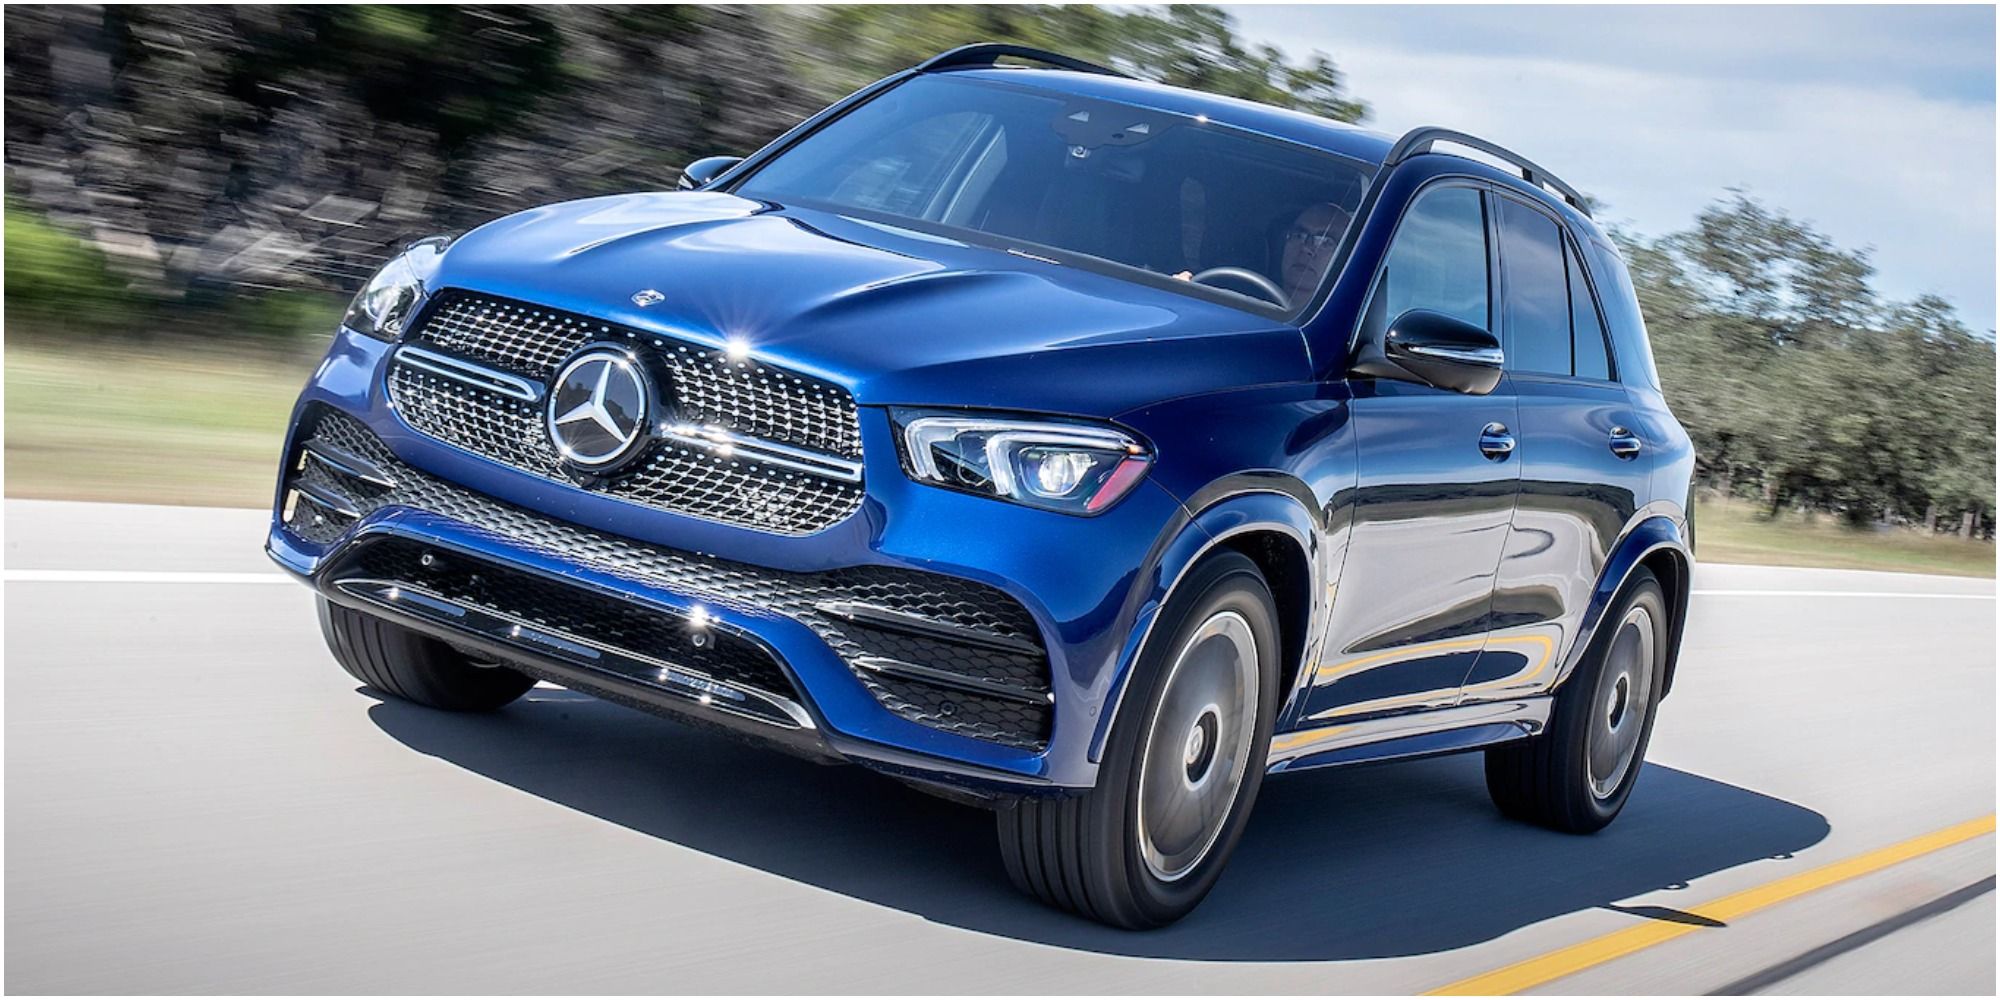 10 Best SUVs On Sale in 2019 According to Edmunds 